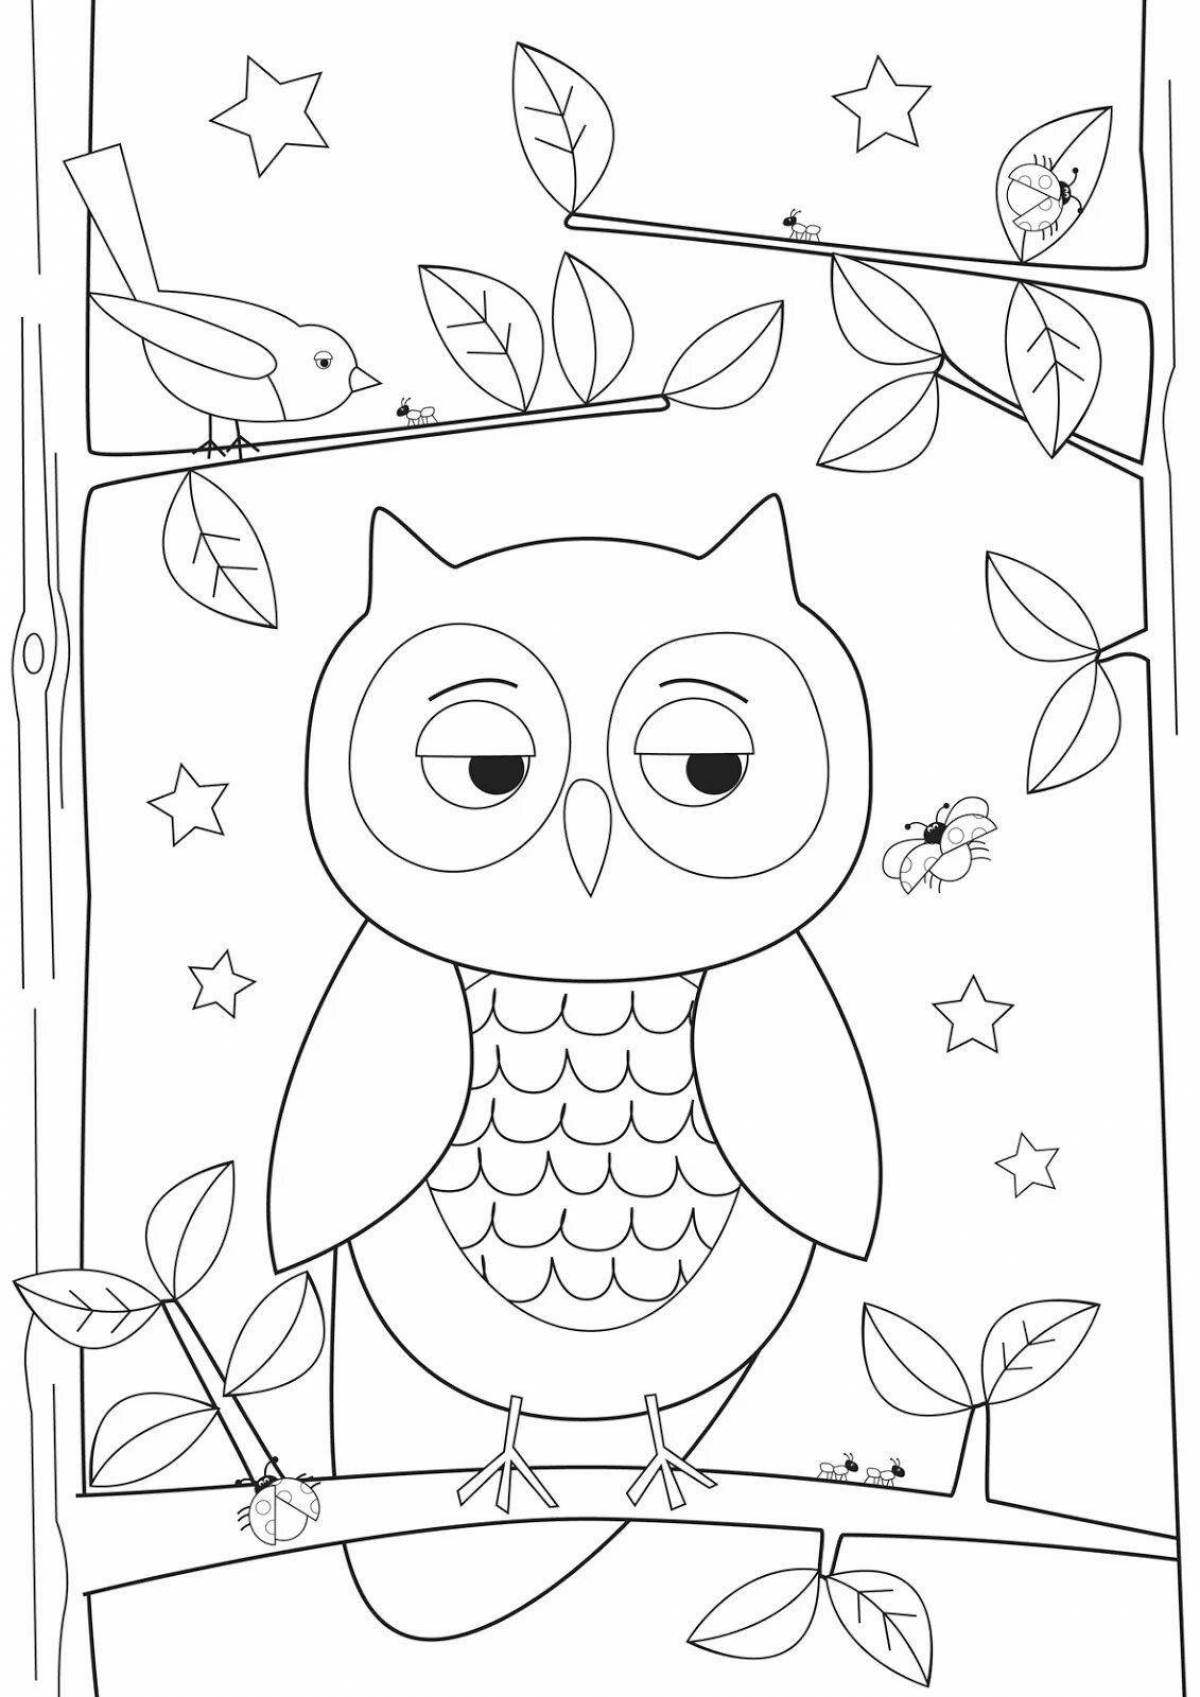 Adorable owl coloring page on a tree